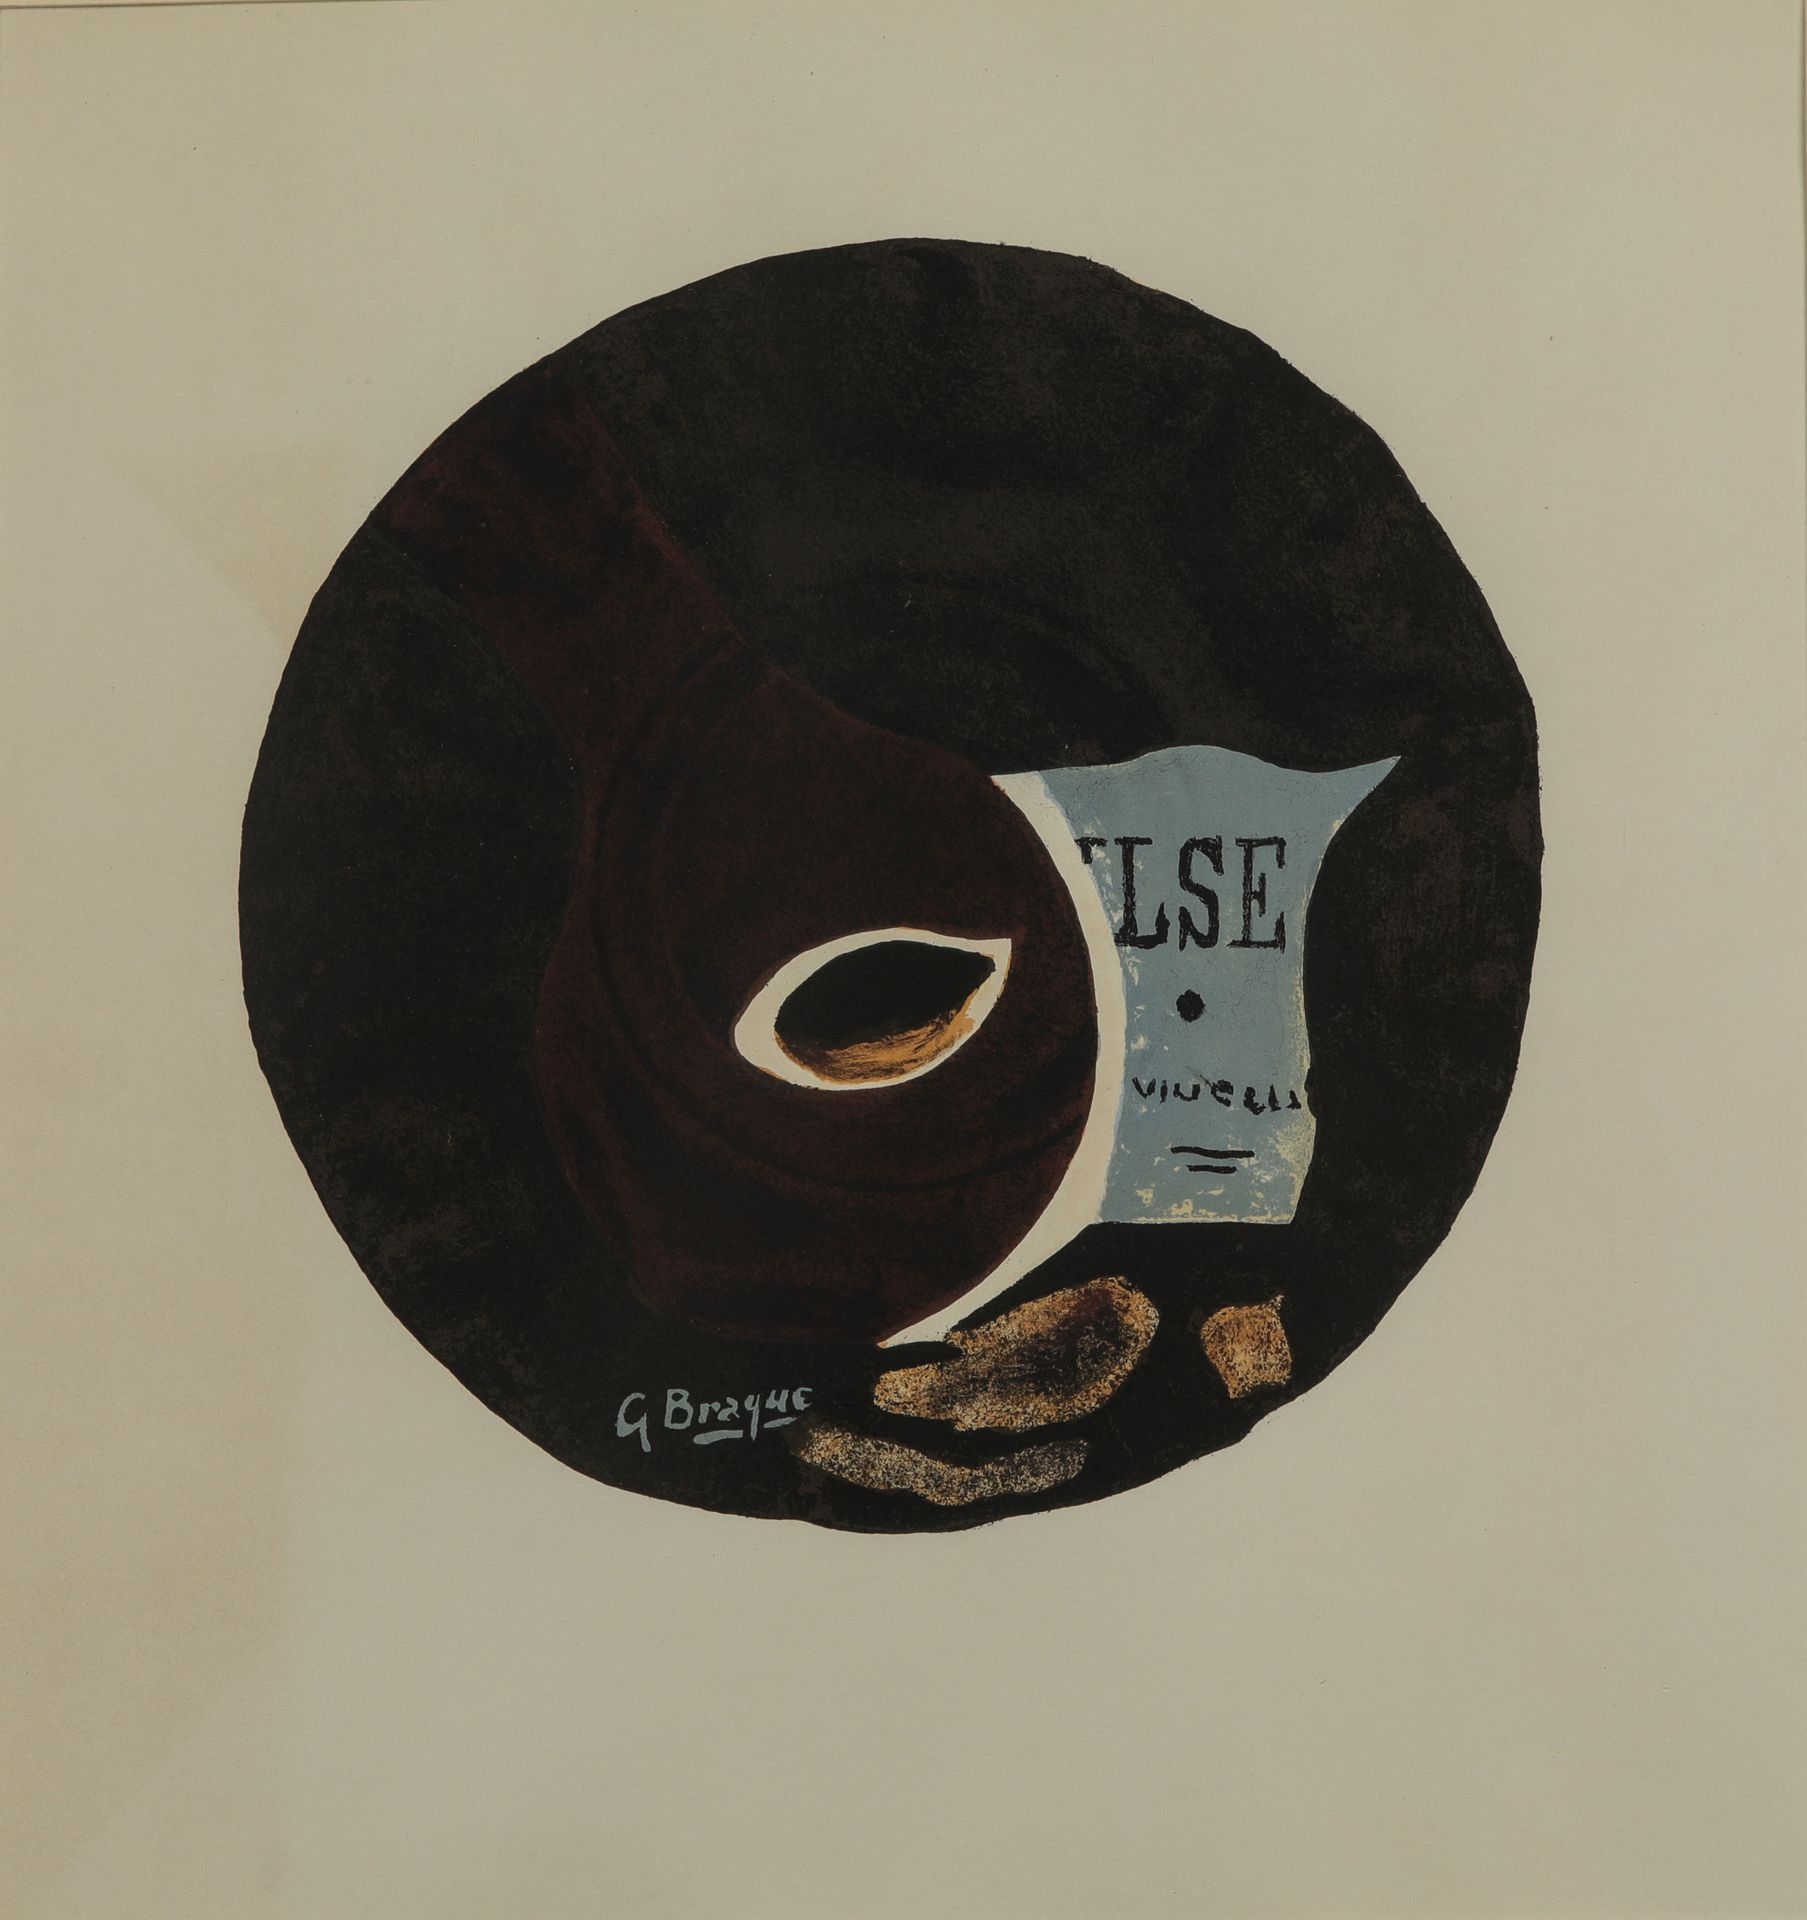 Null Georges BRAQUE (1882-1963) 

VALSE, 1961

Lithograph on paper signed in the&hellip;